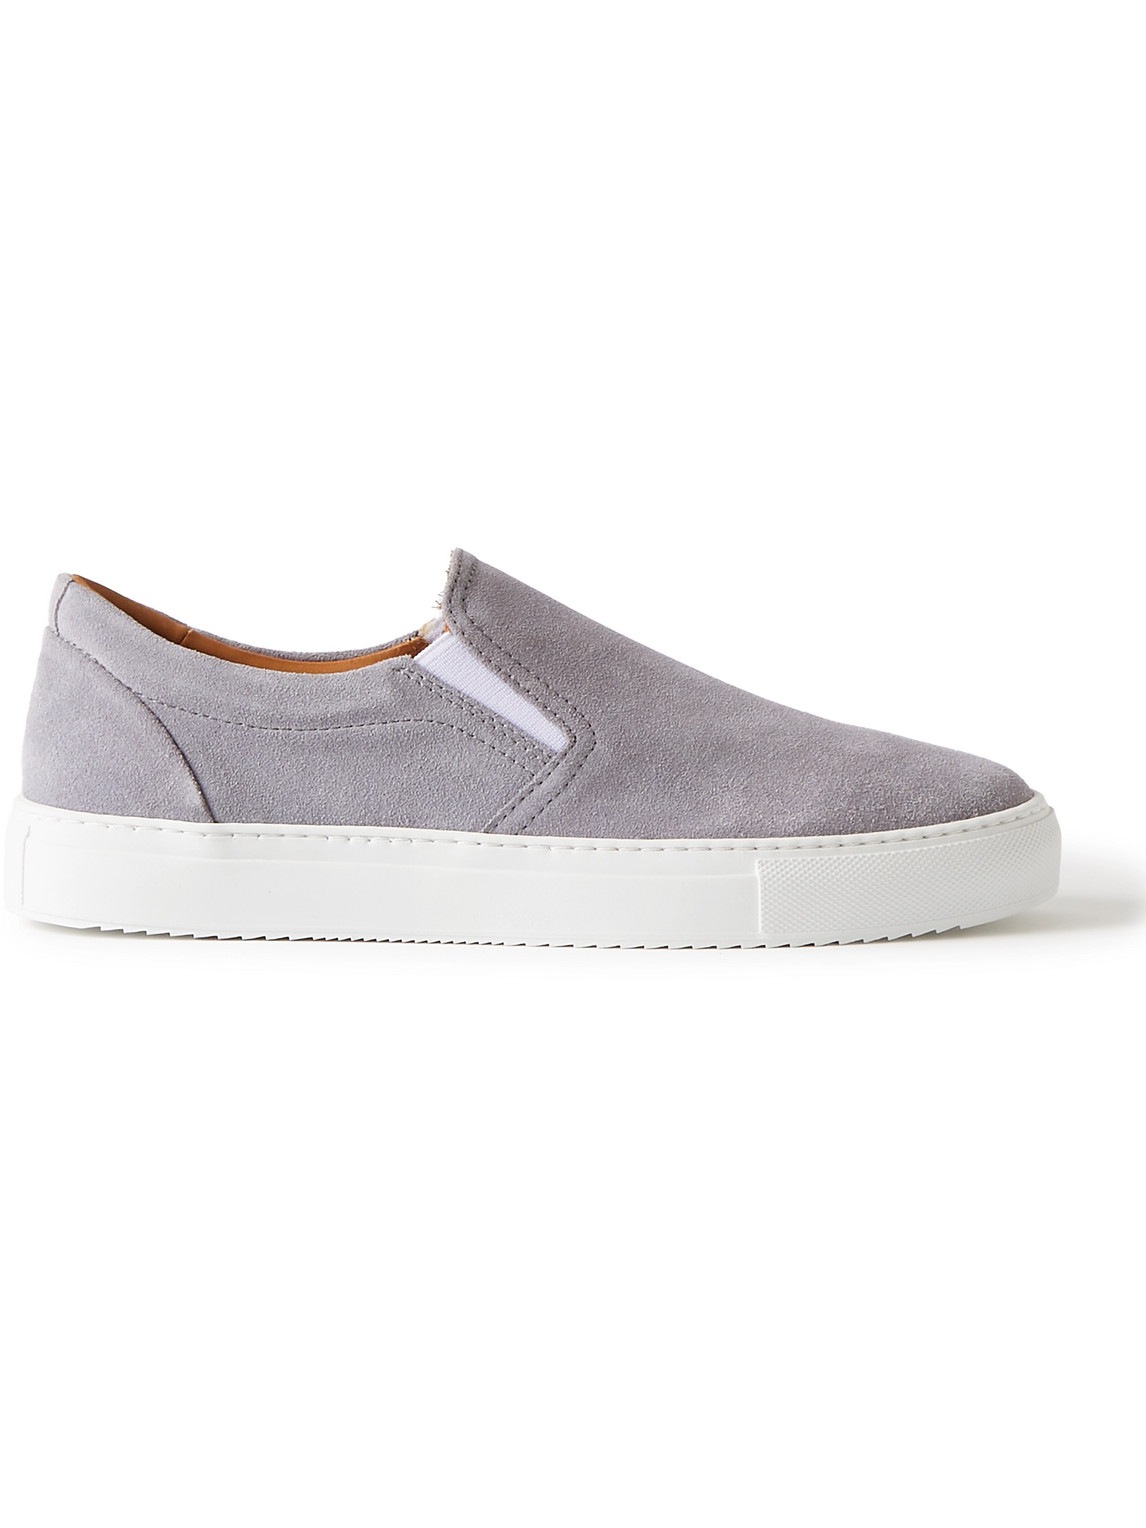 Mr P Regenerated Suede By Evolo® Slip-on Trainers In Grey